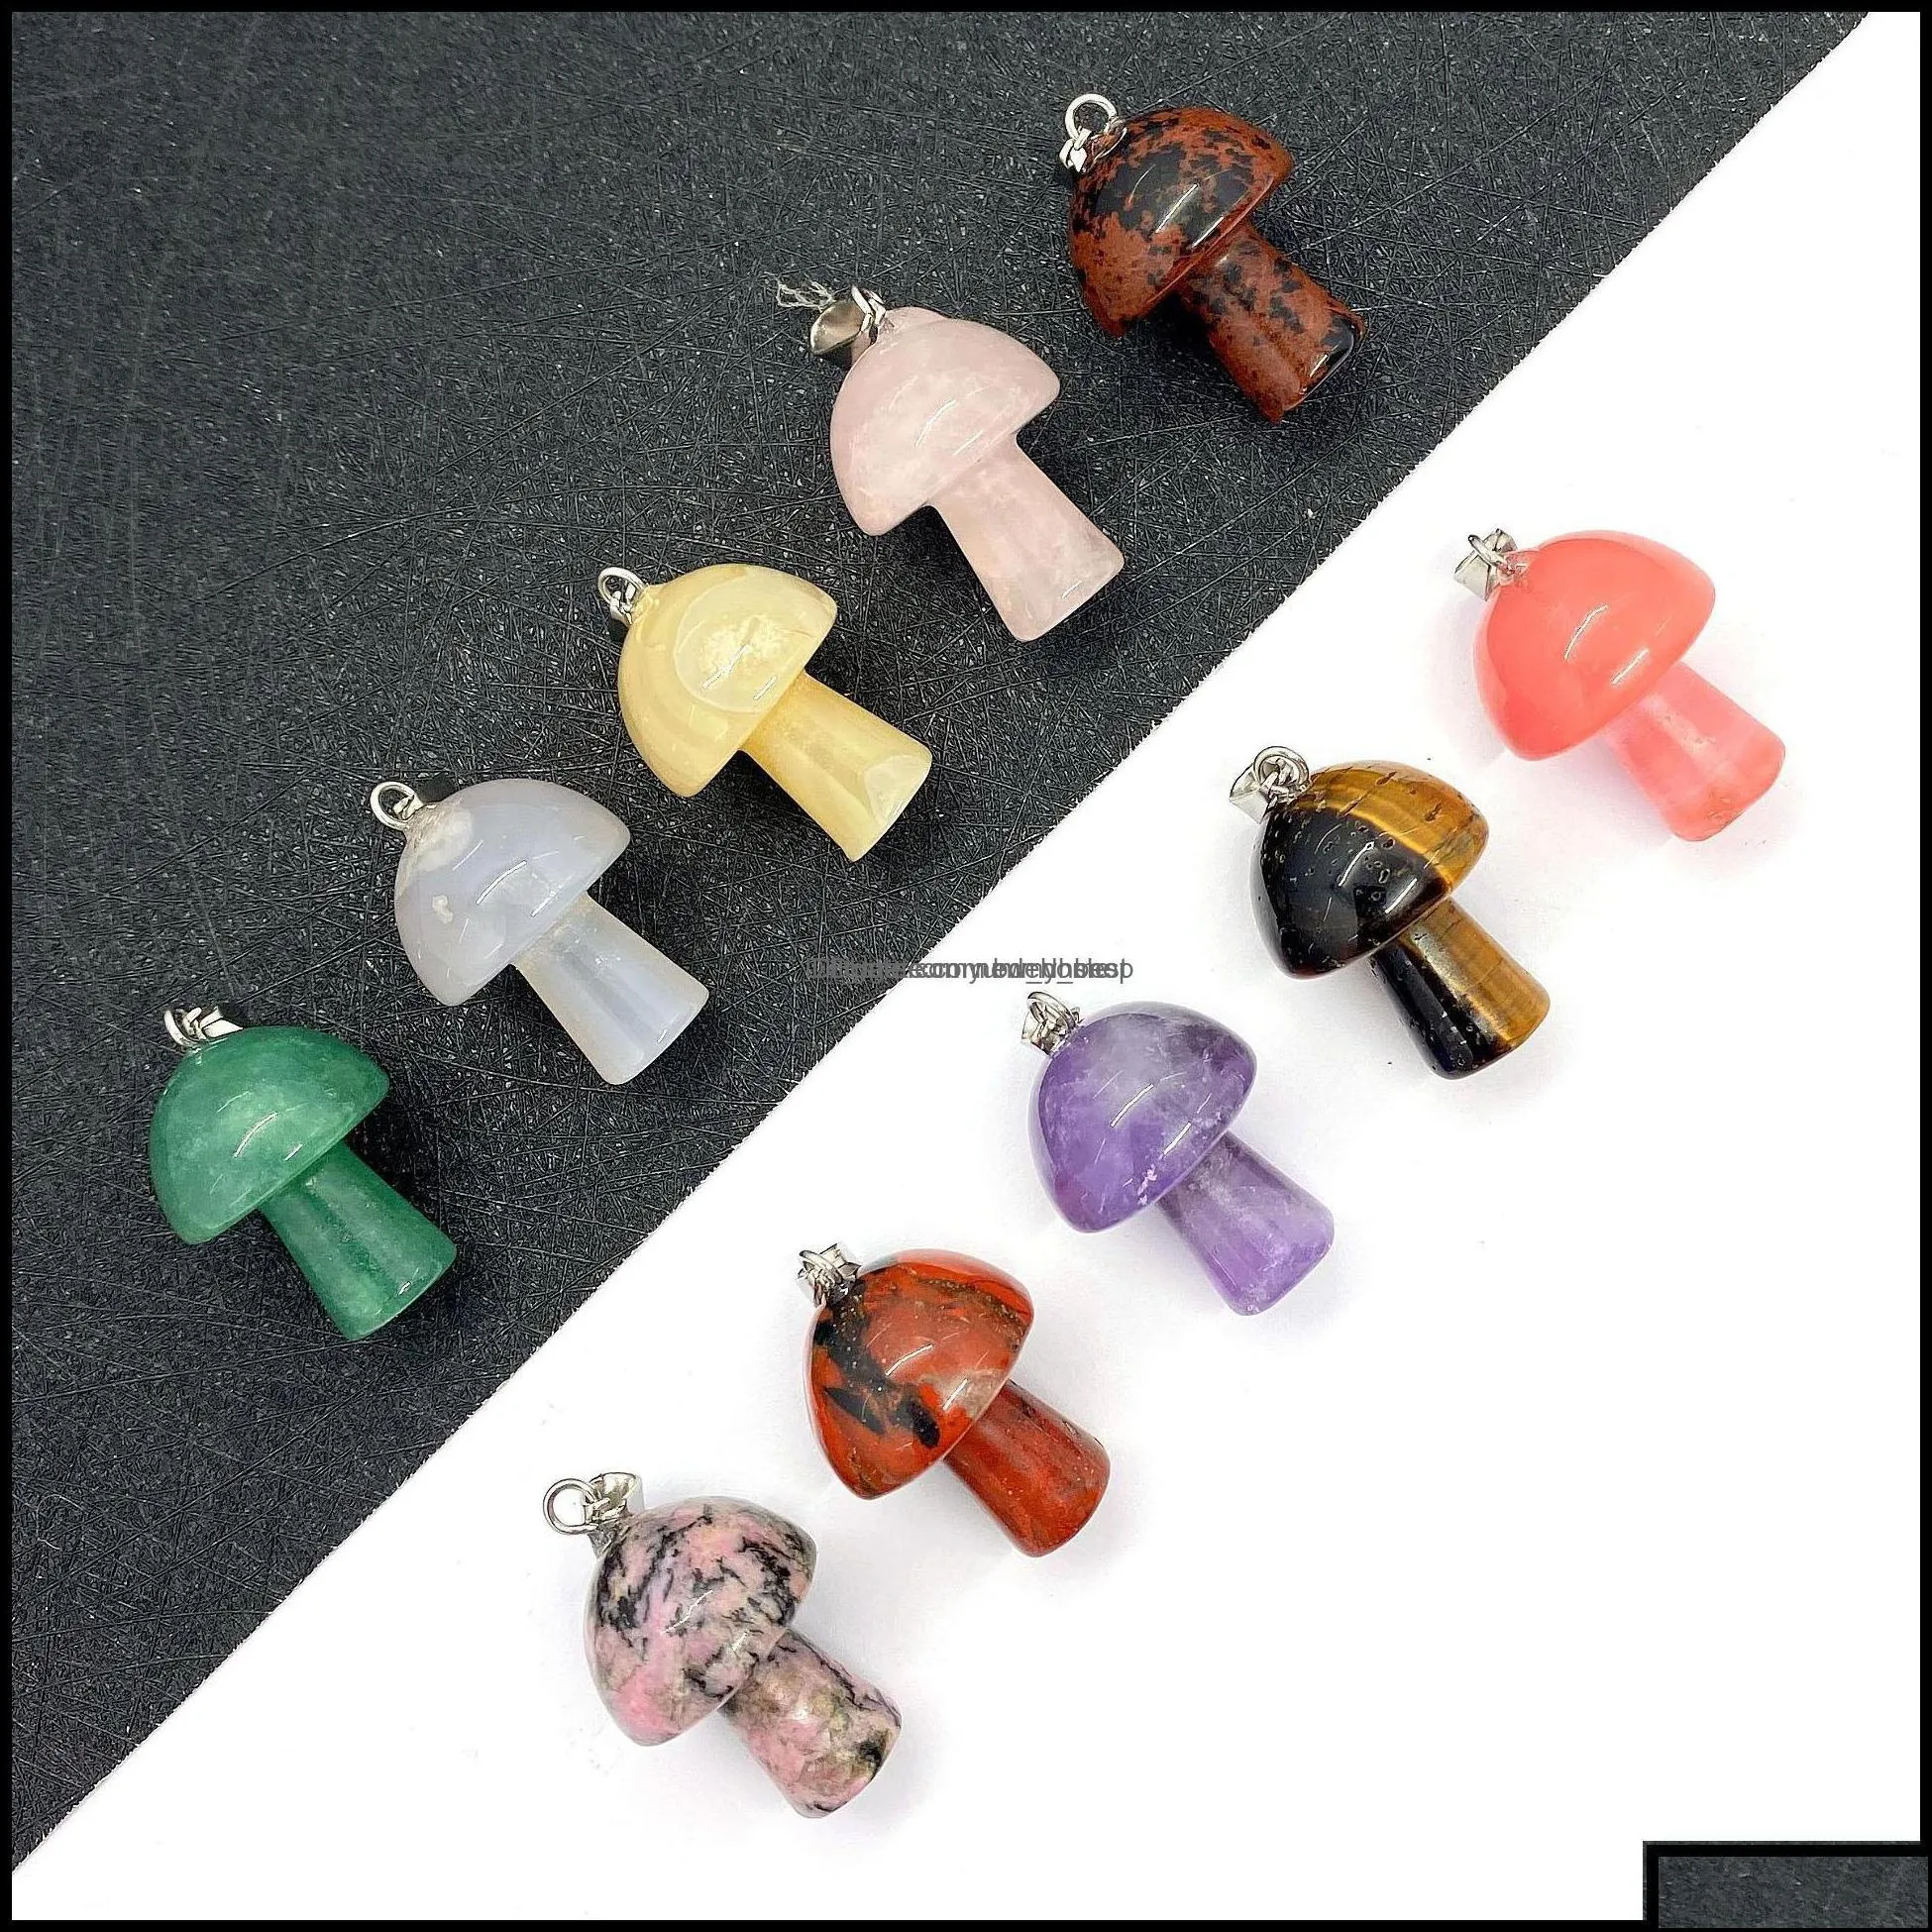 charms jewelry findings components mix natural stone quartz crystal amethyst agates aventurine mushroom pendant for diy making drop